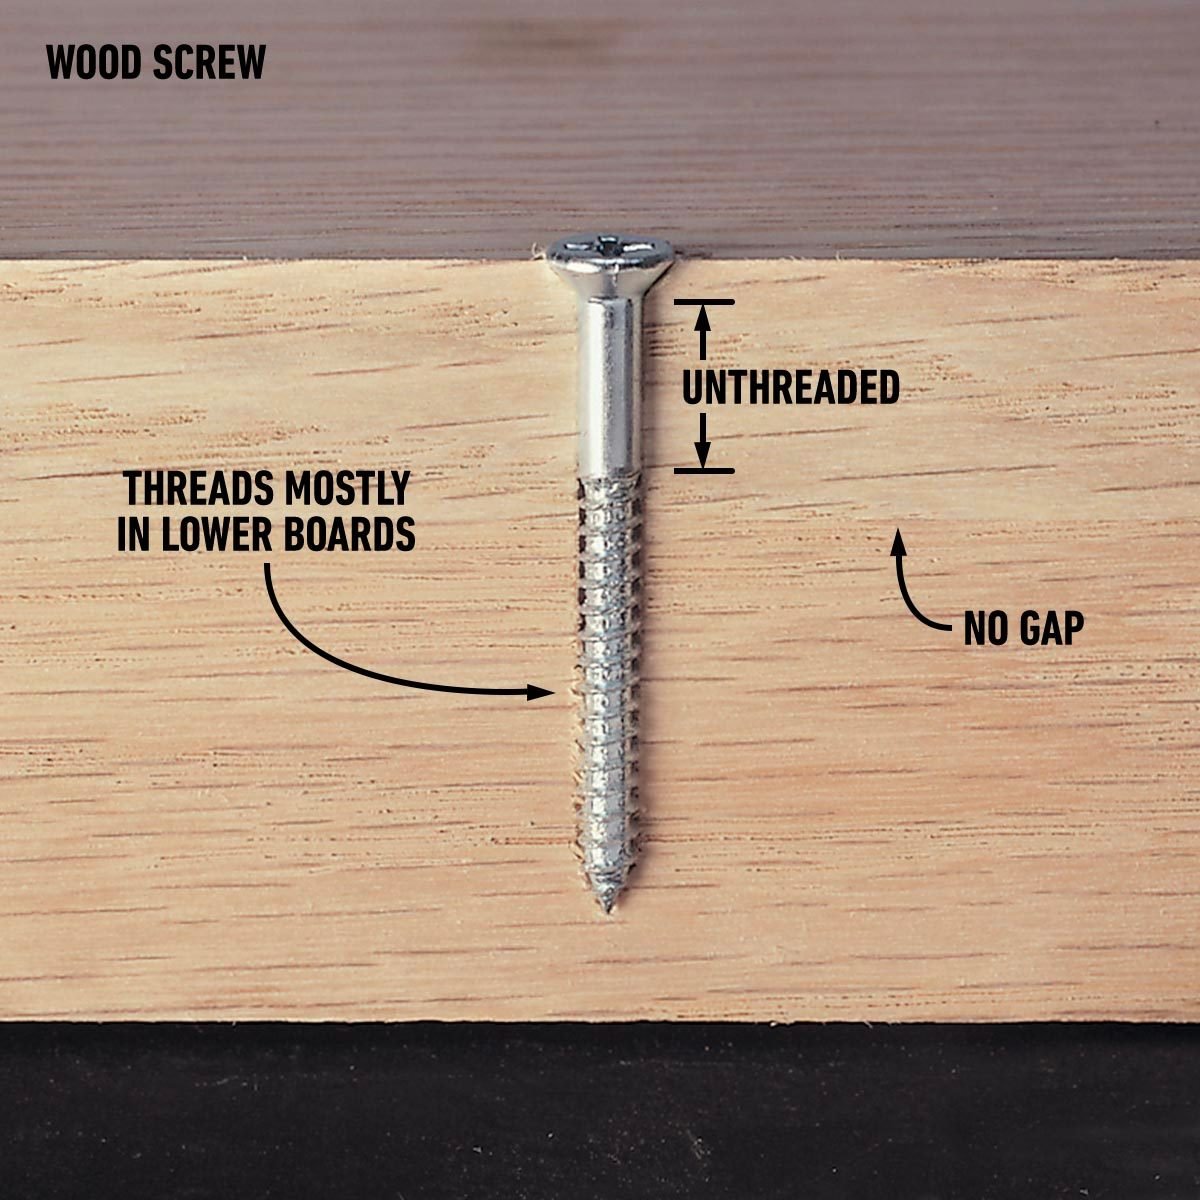 A cross section of a wood screw holding two wooden boards together, showing no gap in the boards